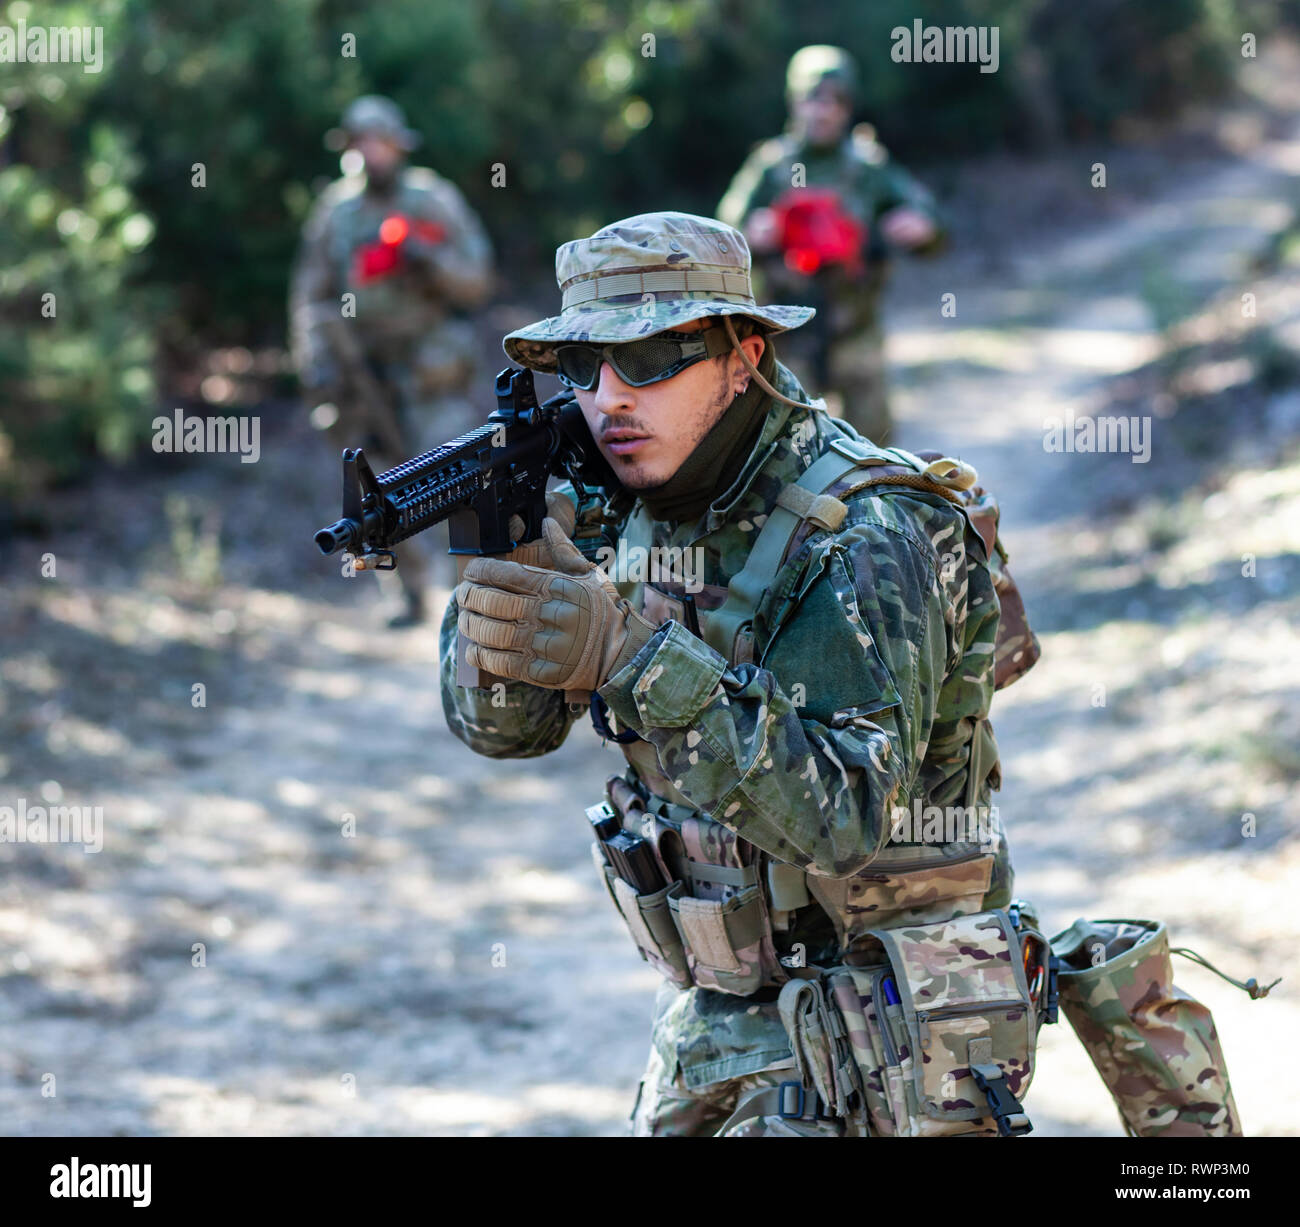 Airsoft military game player in camouflage uniform with armed assault rifle  Stock Photo - Alamy